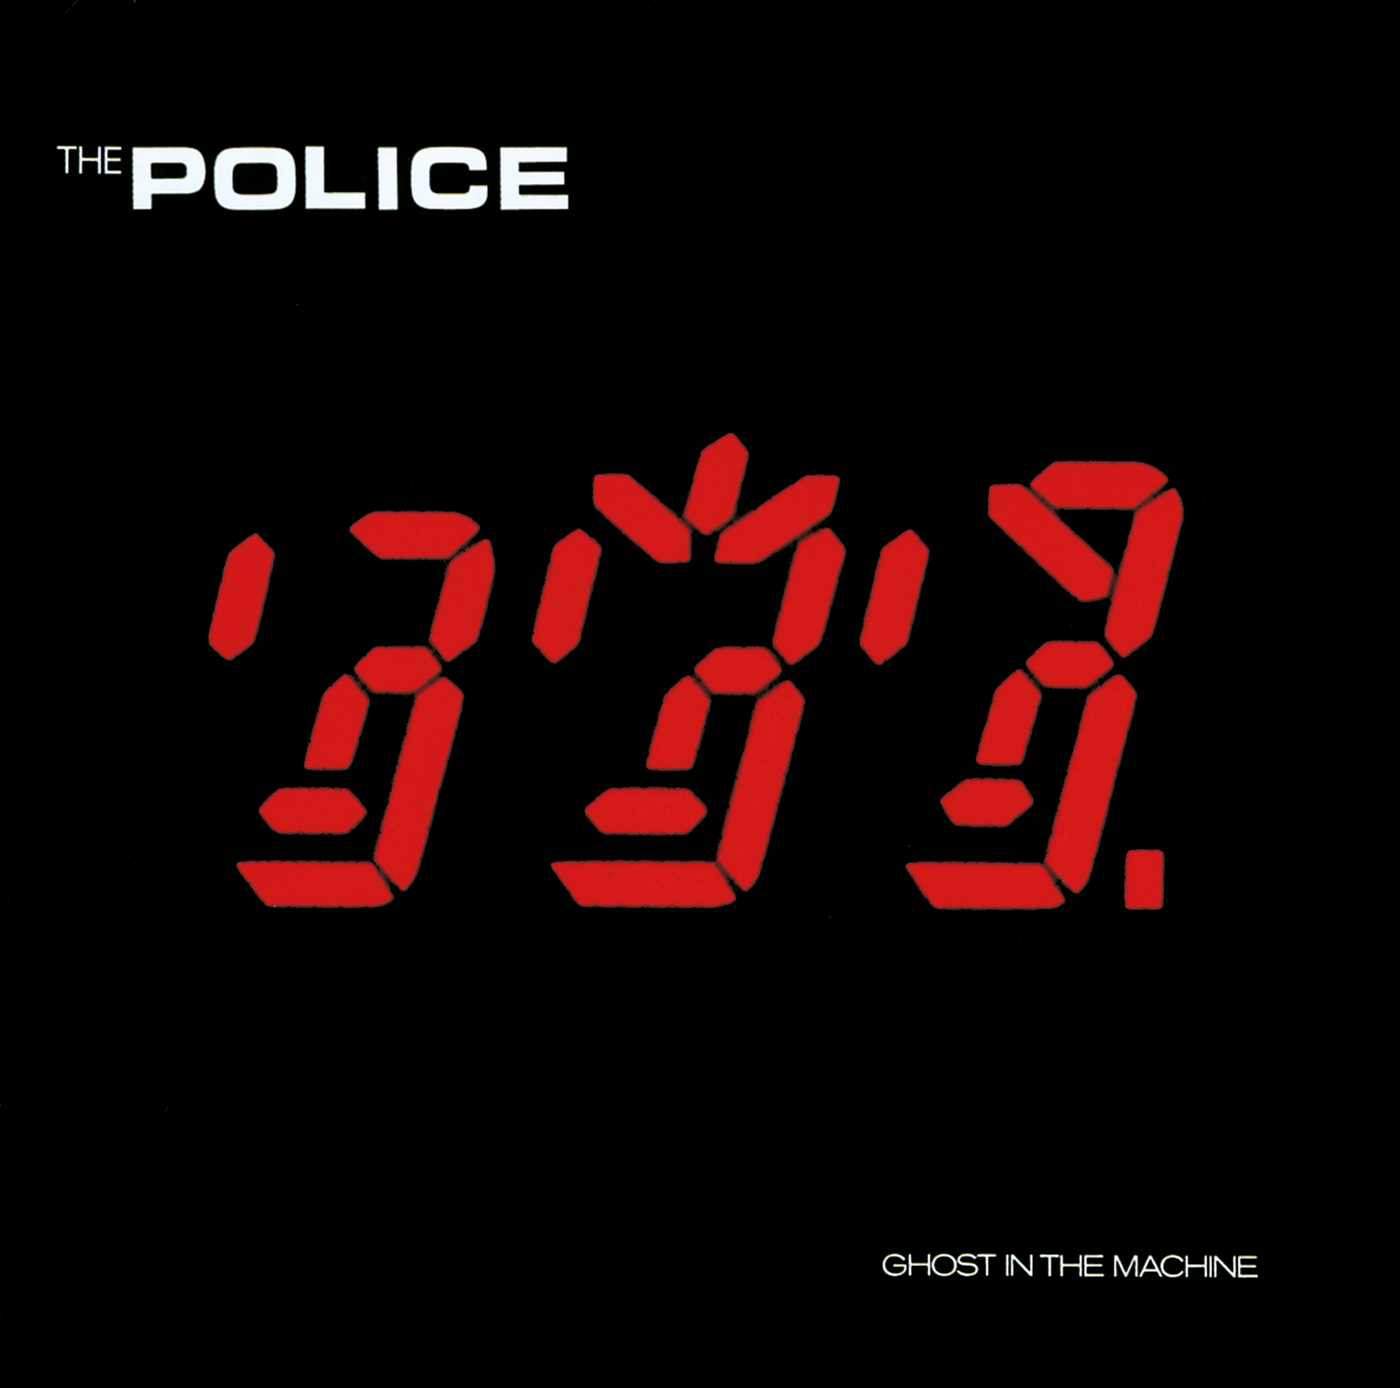 The-Police-Ghost-In-the-Machine-vinyl-record-album-front